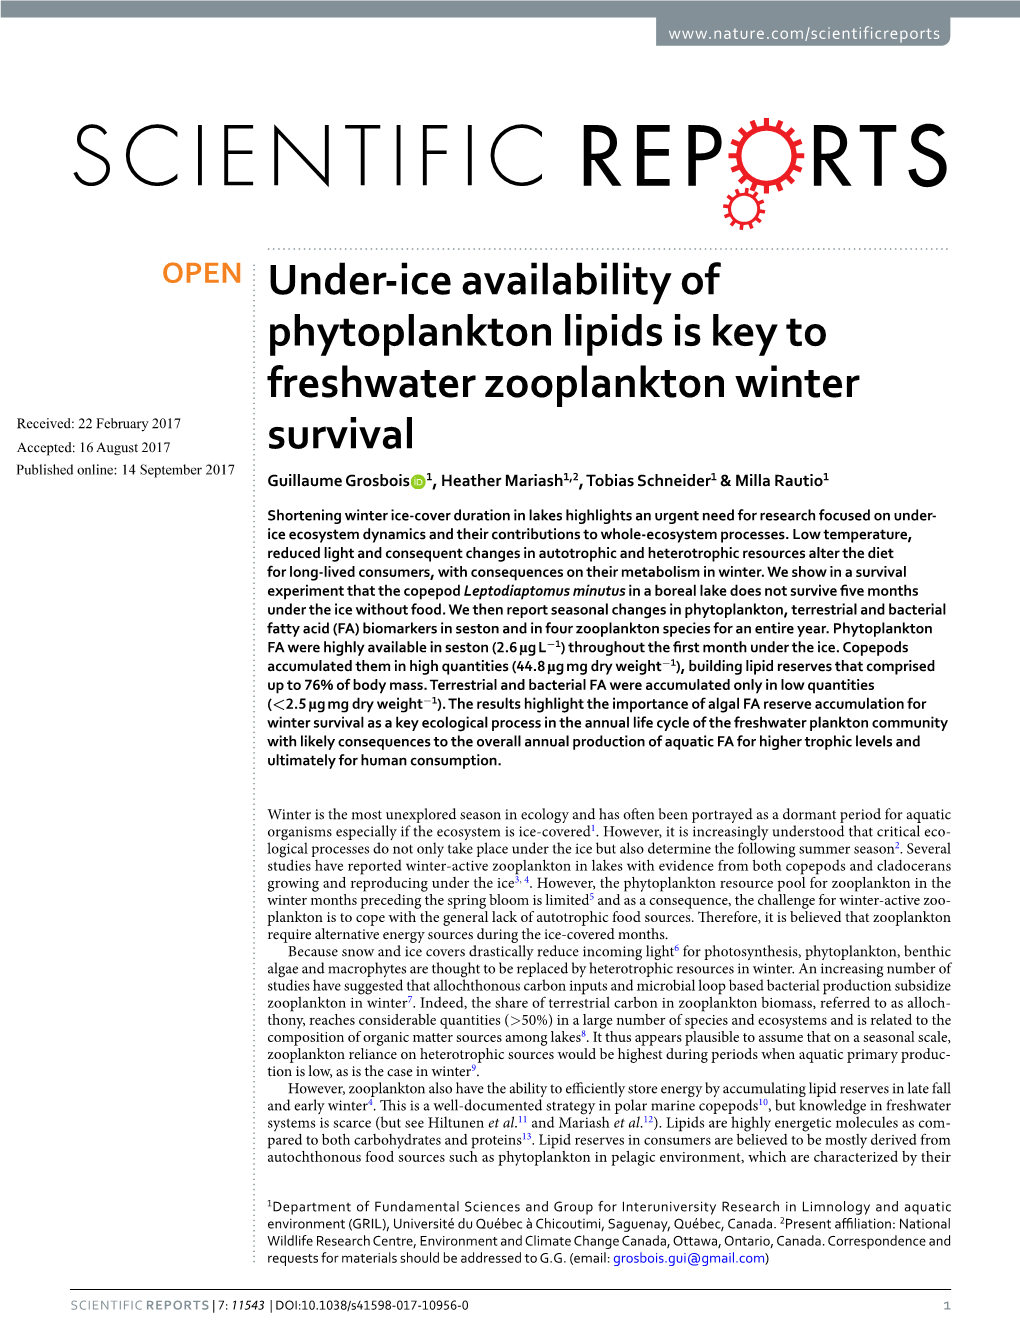 Under-Ice Availability of Phytoplankton Lipids Is Key to Freshwater